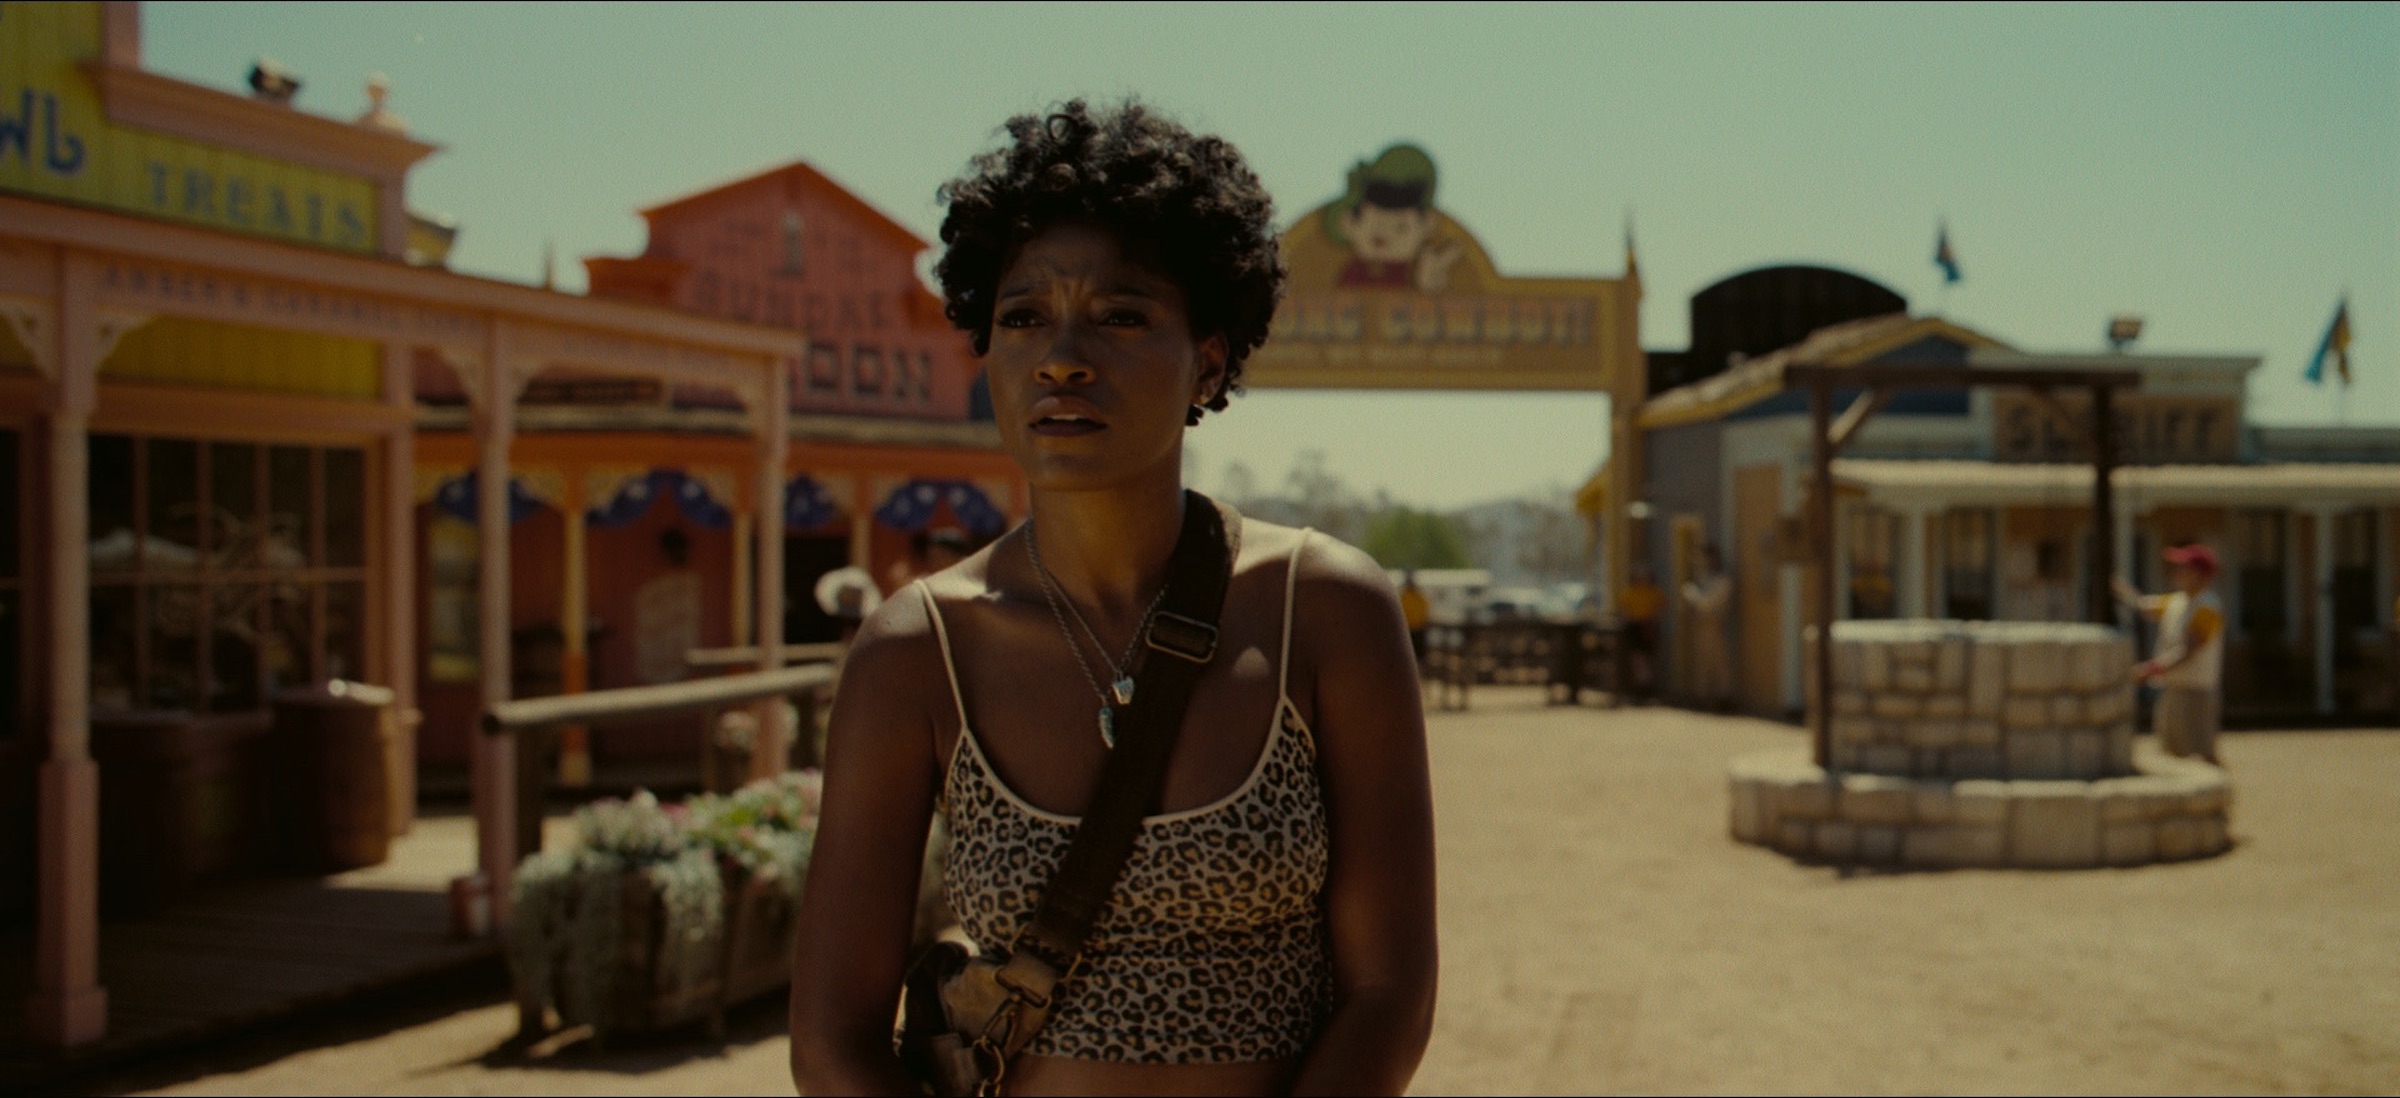 Keke Palmer in 'Nope' (Courtesy of Universal Pictures)